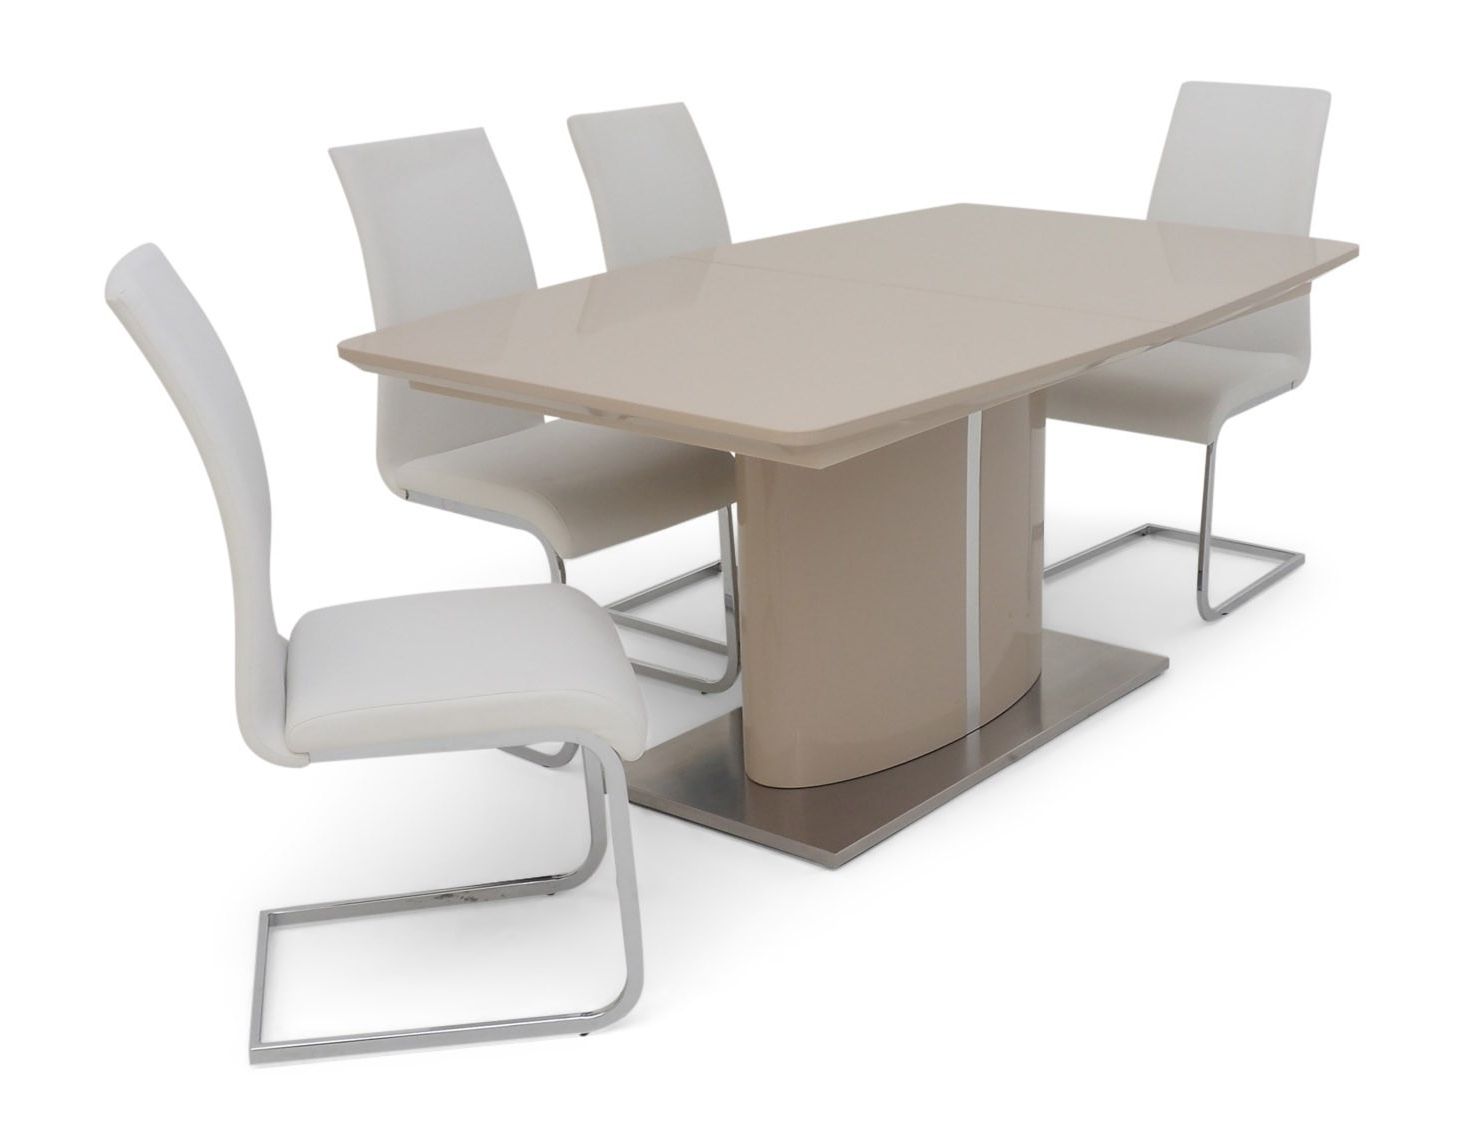 Extending Cream Gloss Dining Table + 4 Chairs Set Throughout Fashionable Extendable Dining Tables And 4 Chairs (View 10 of 25)